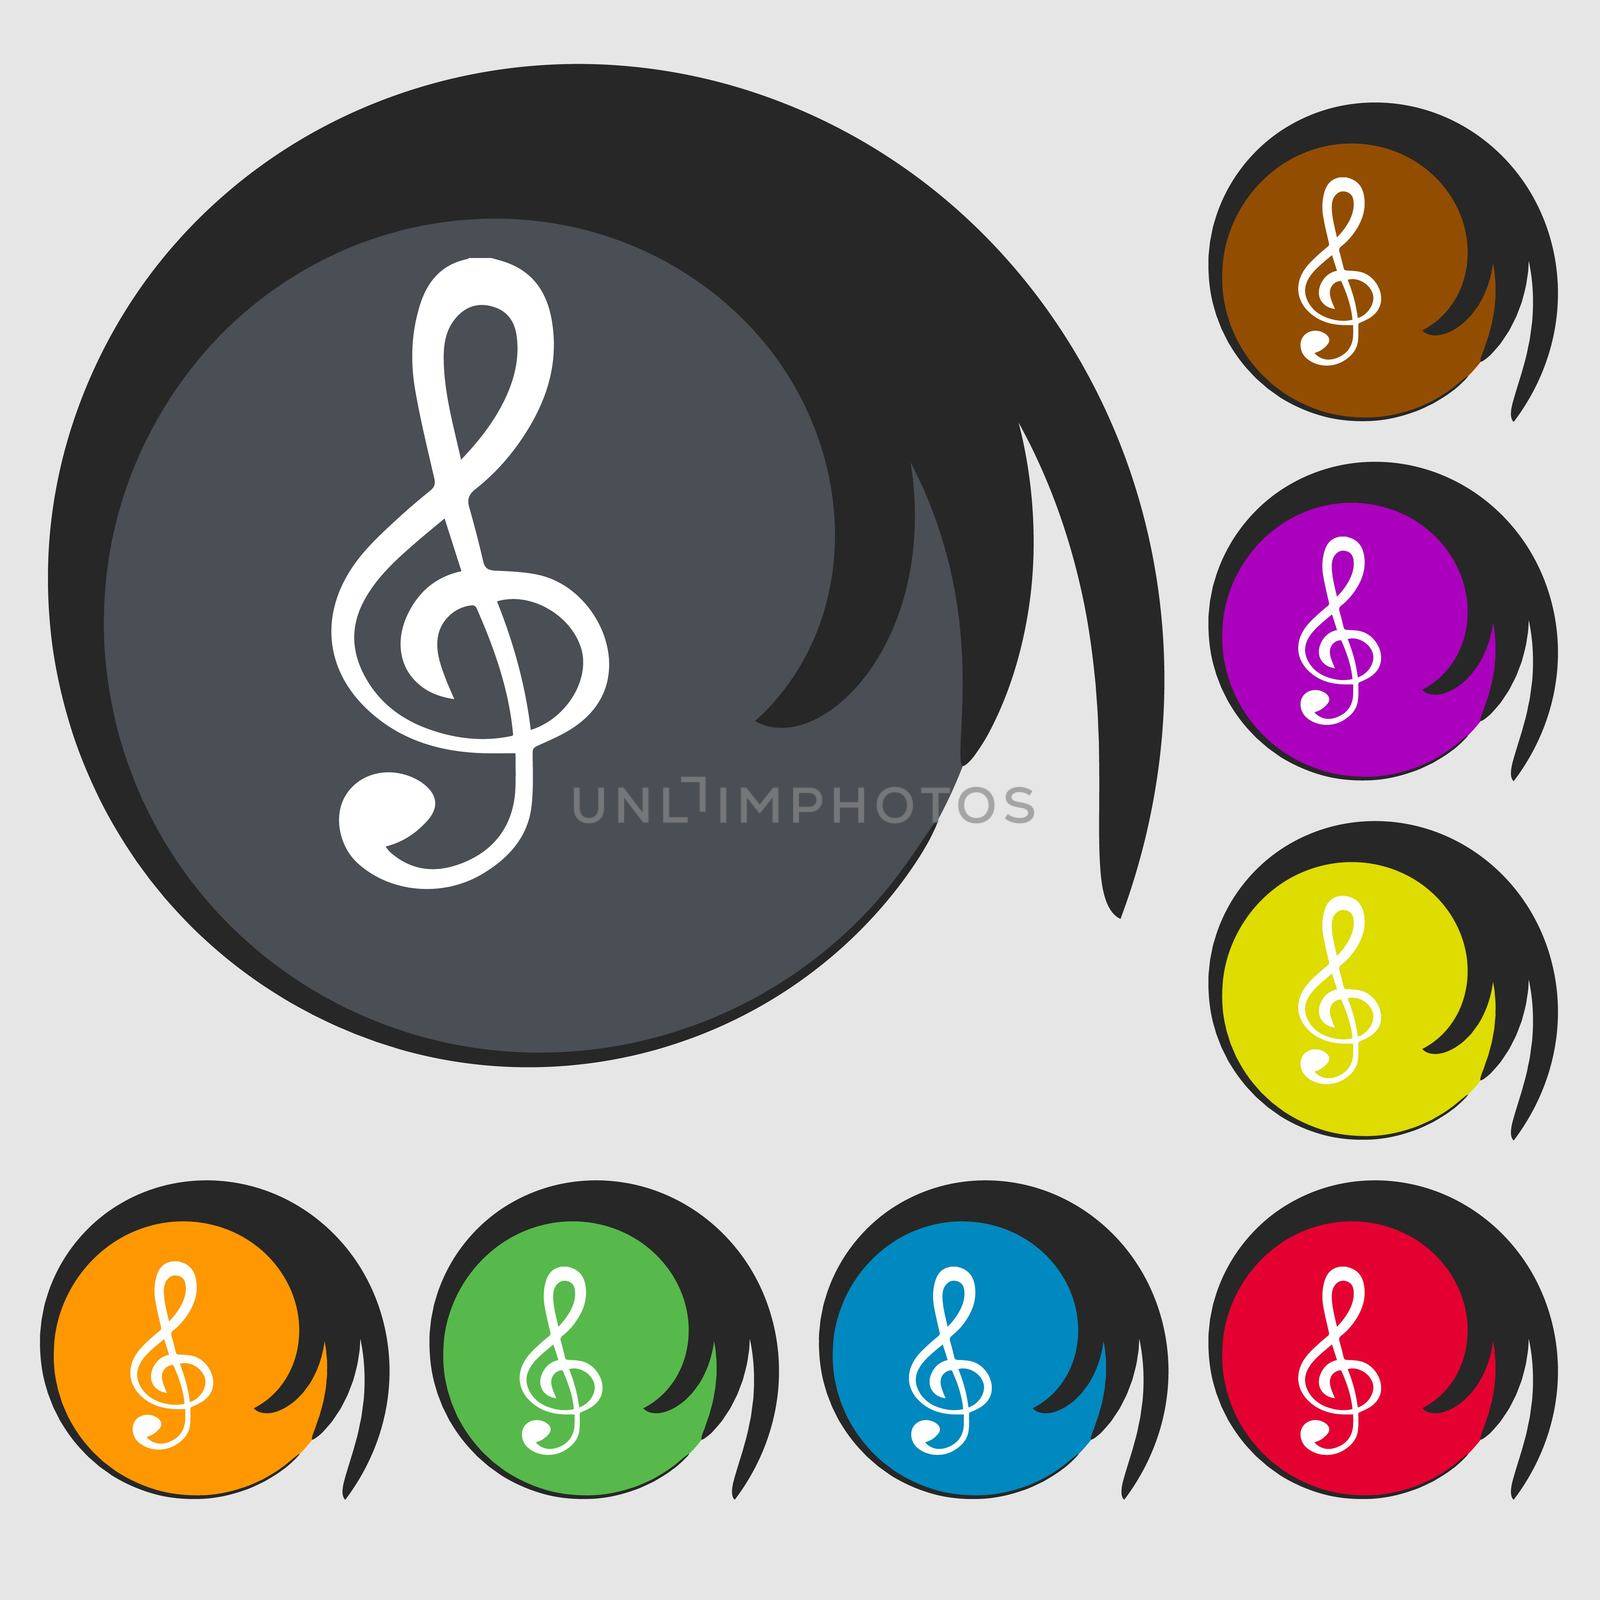 treble clef icon. Symbols on eight colored buttons. illustration